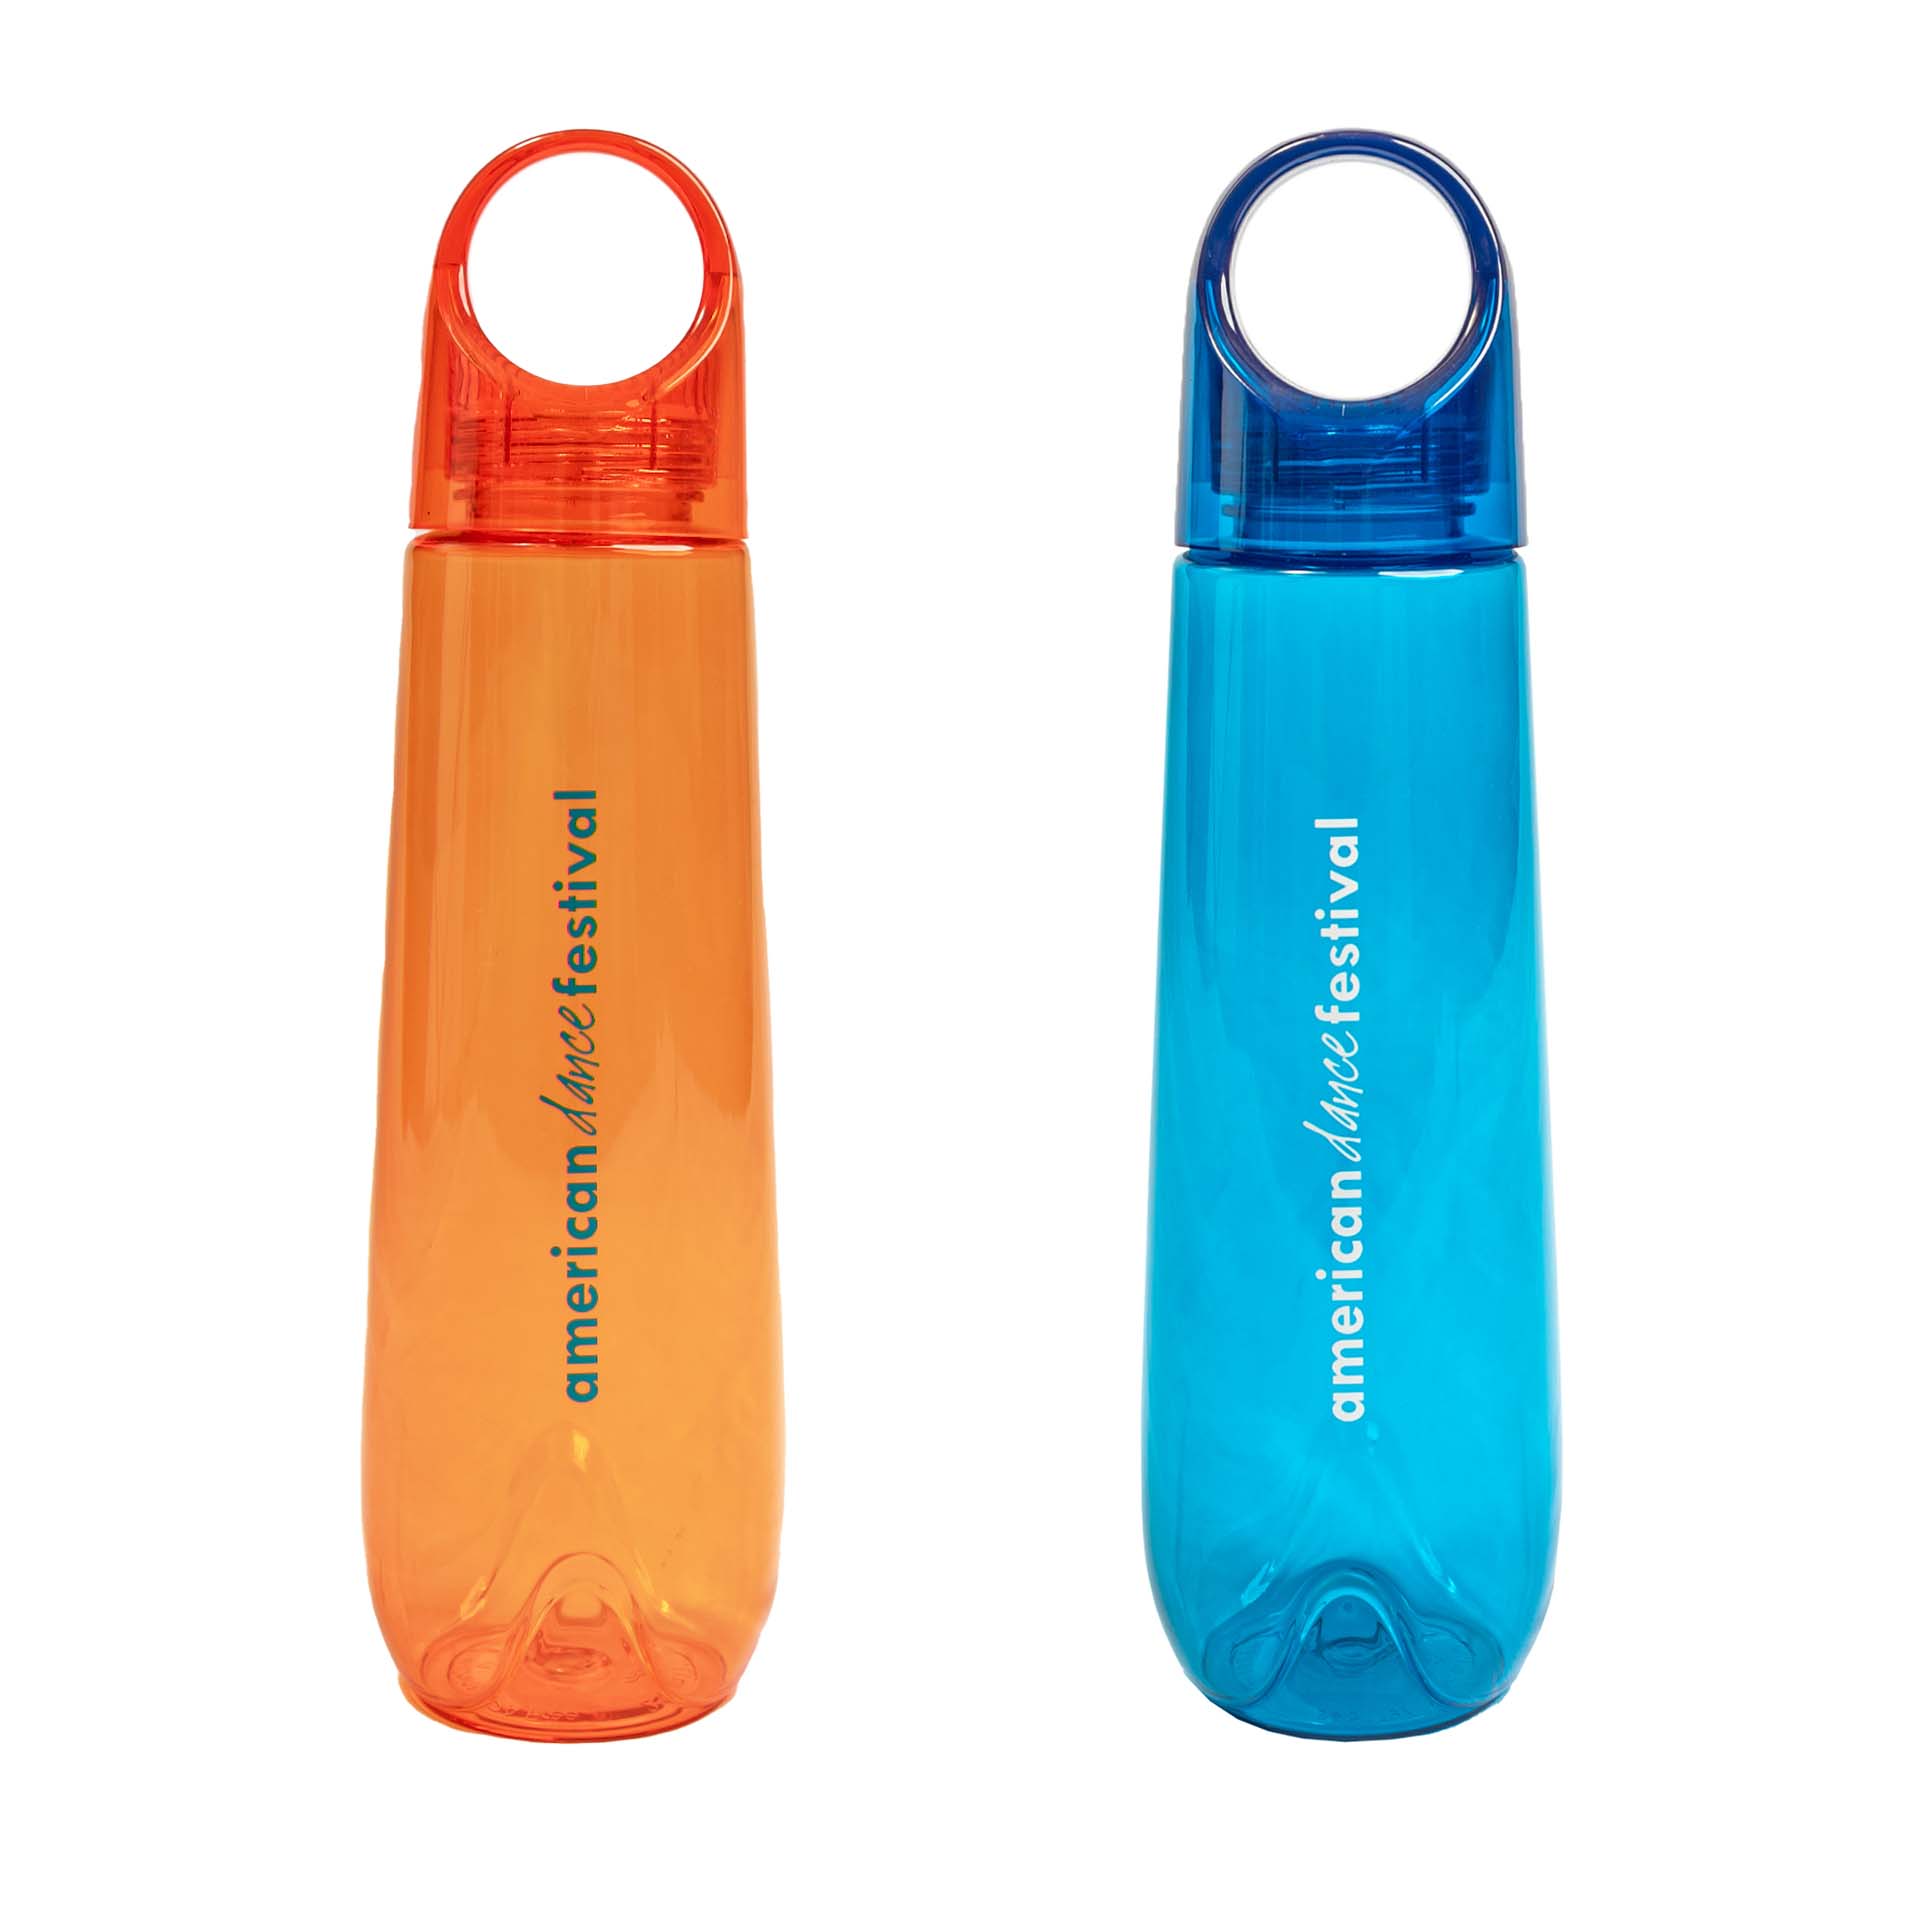 Two water bottles (one orange, one blue) with "american dance festival" printed on it